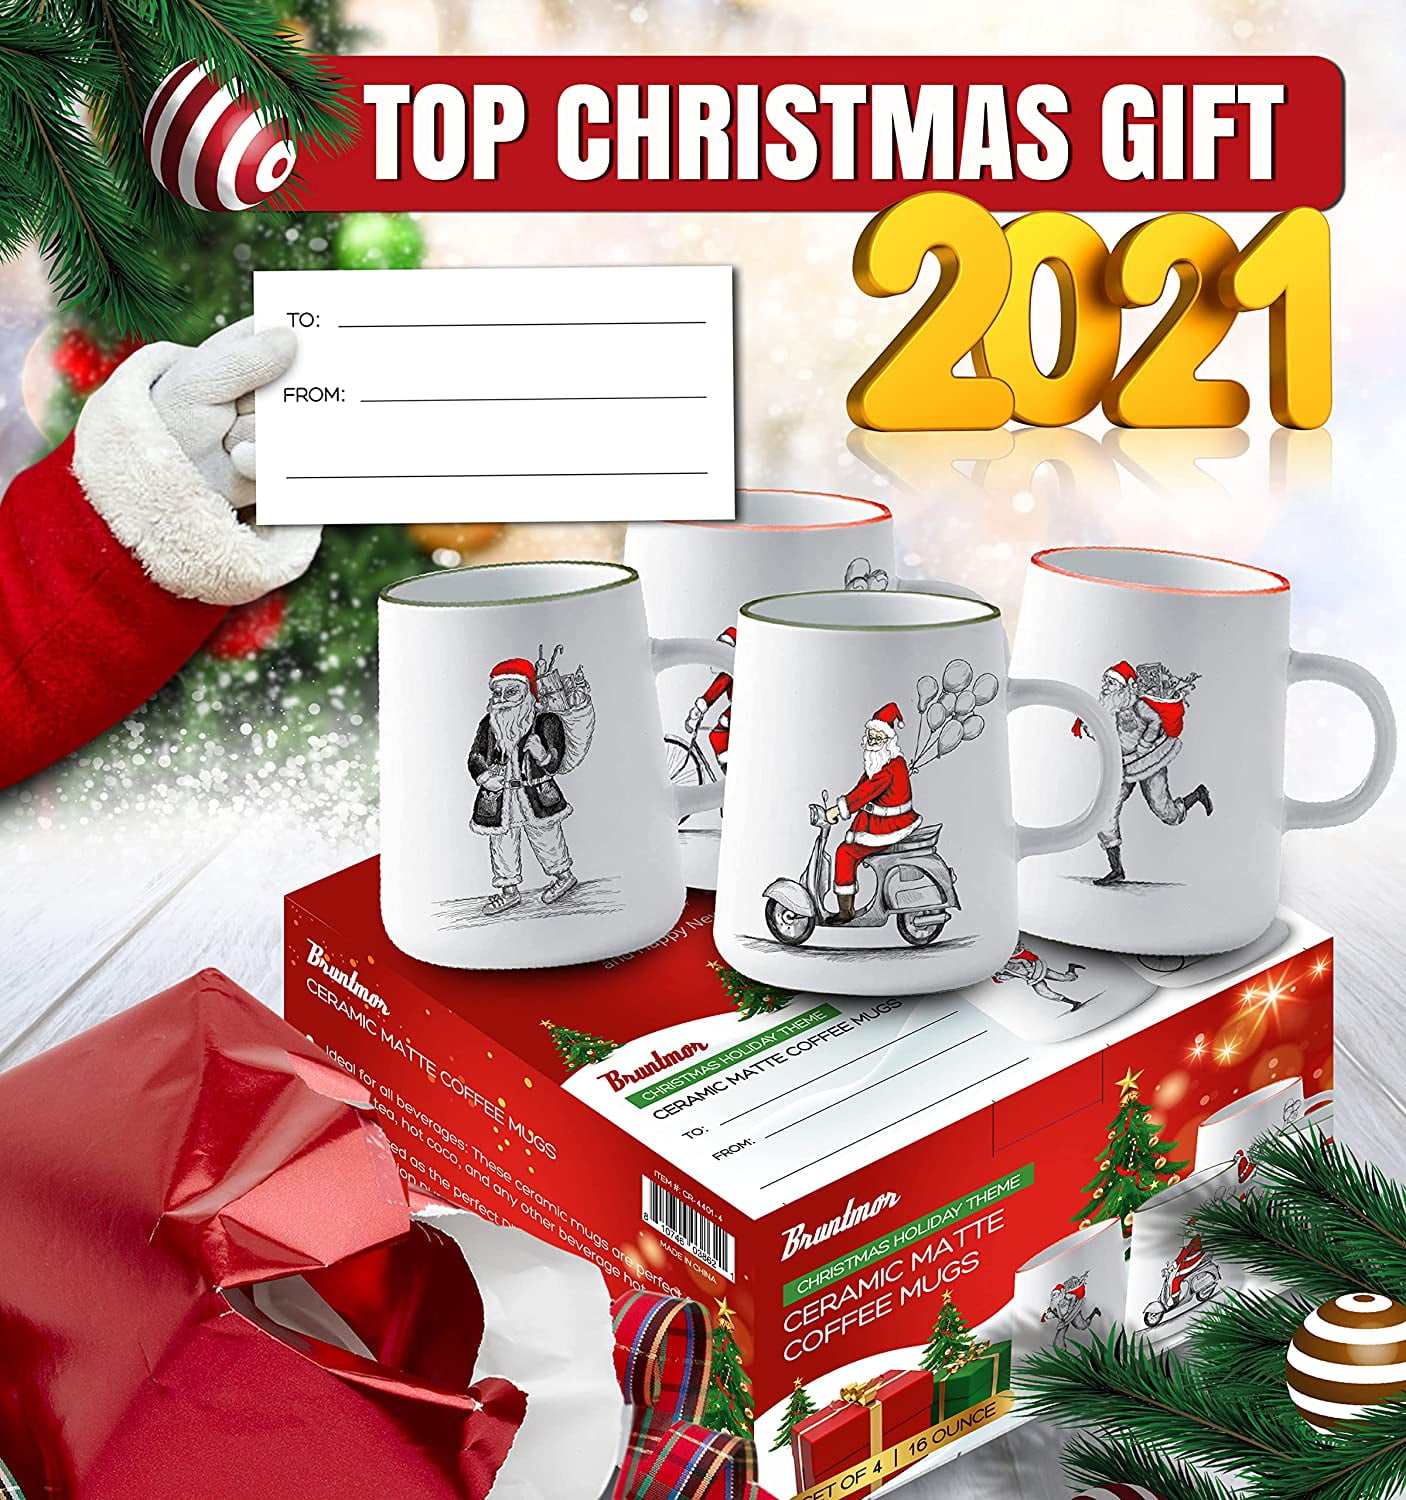 Christmas Gifts Large Coffee Mugs Giant LARGEST MUG IN THE WORLD GIFT BOXED  Cup